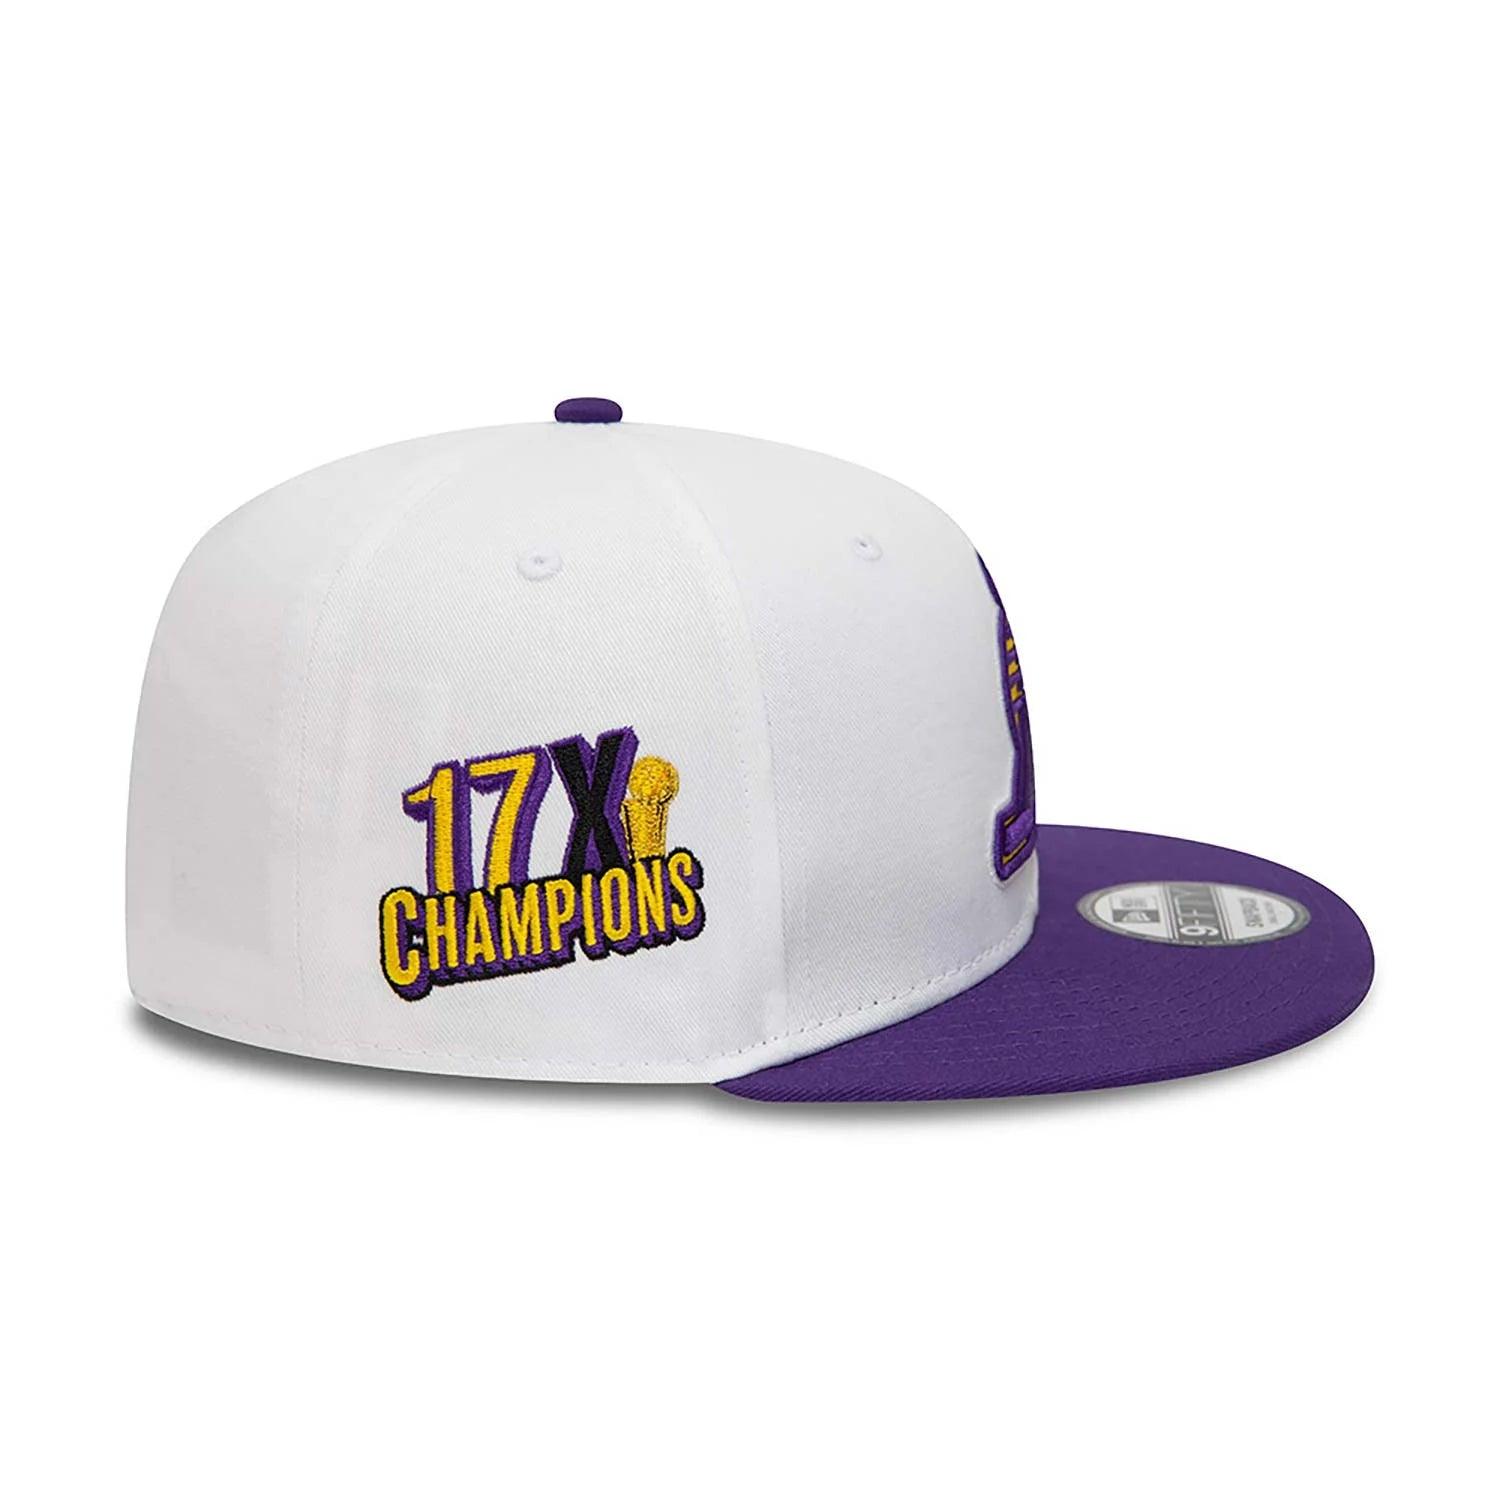 NEW ERA 9FIFTY WHITE CROWN PATCHES LOS ANGELES LAKERS TWO TONE SNAPBACK - FAM